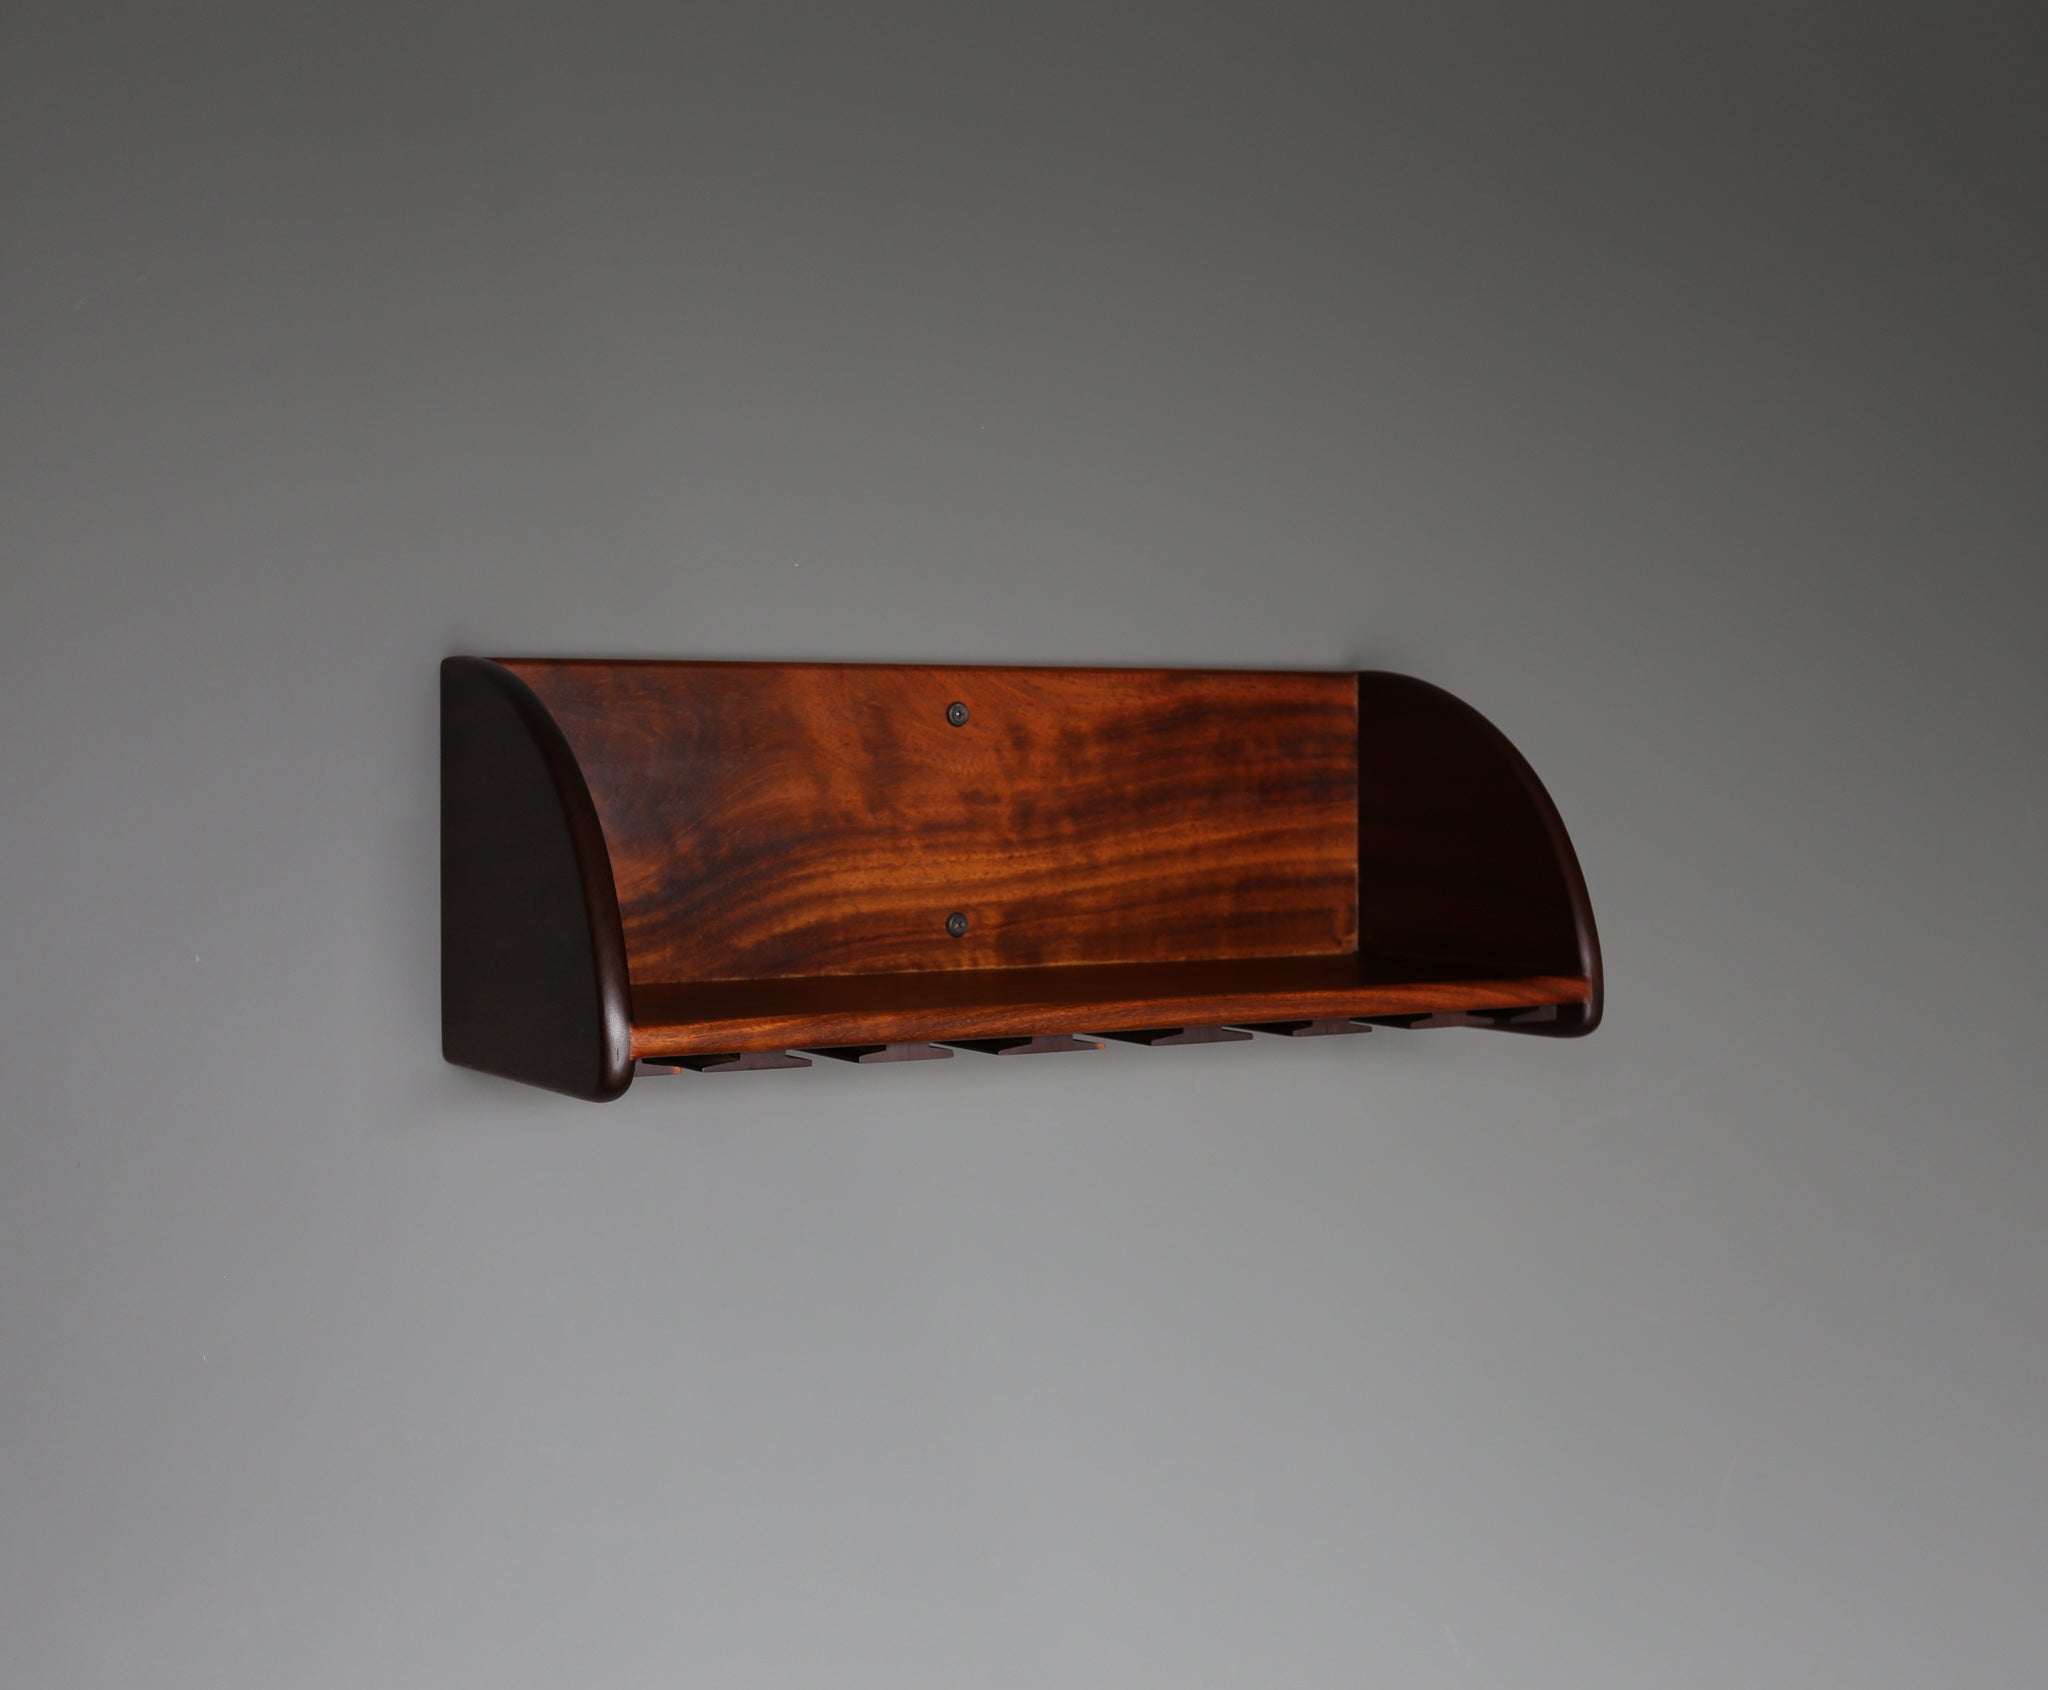 = SOLD = Robert Trout Handcrafted Solid Walnut Floating Shelf, circa 1968